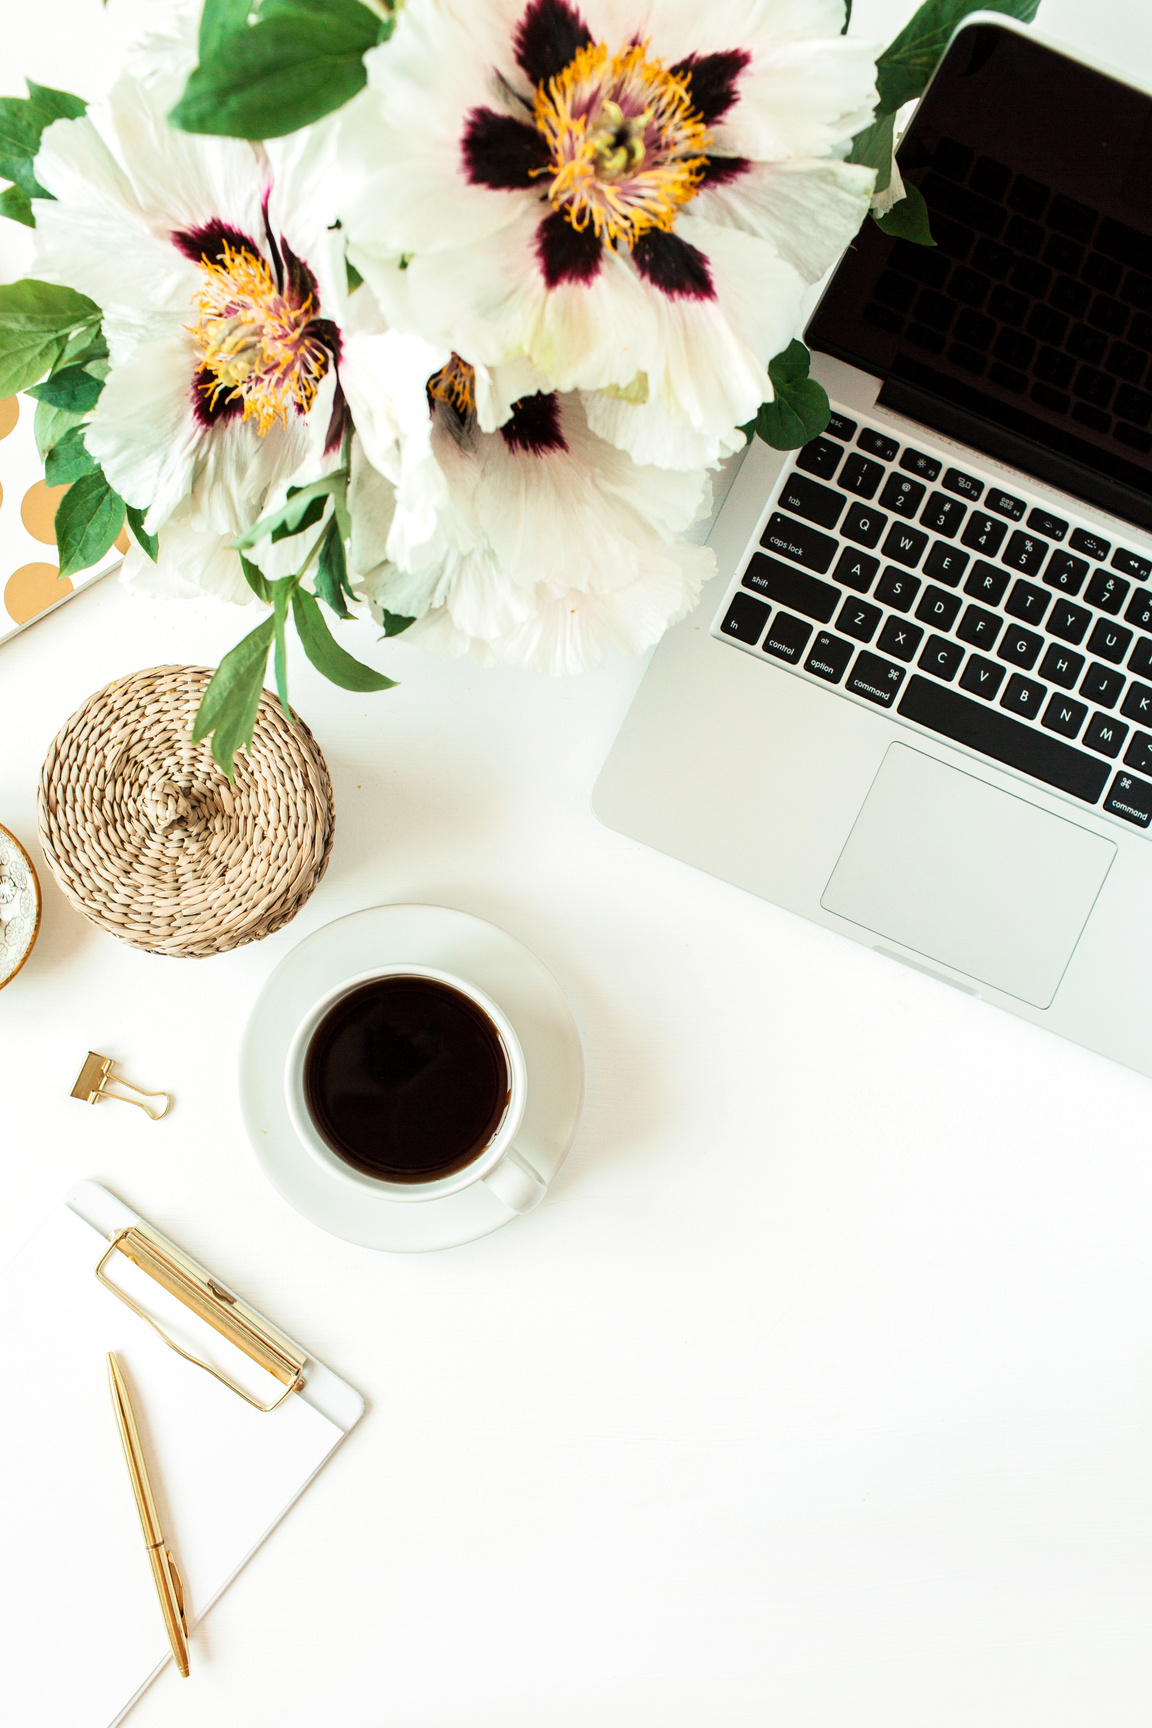 Laptop, Coffee, Stationery and Flowers on White Background